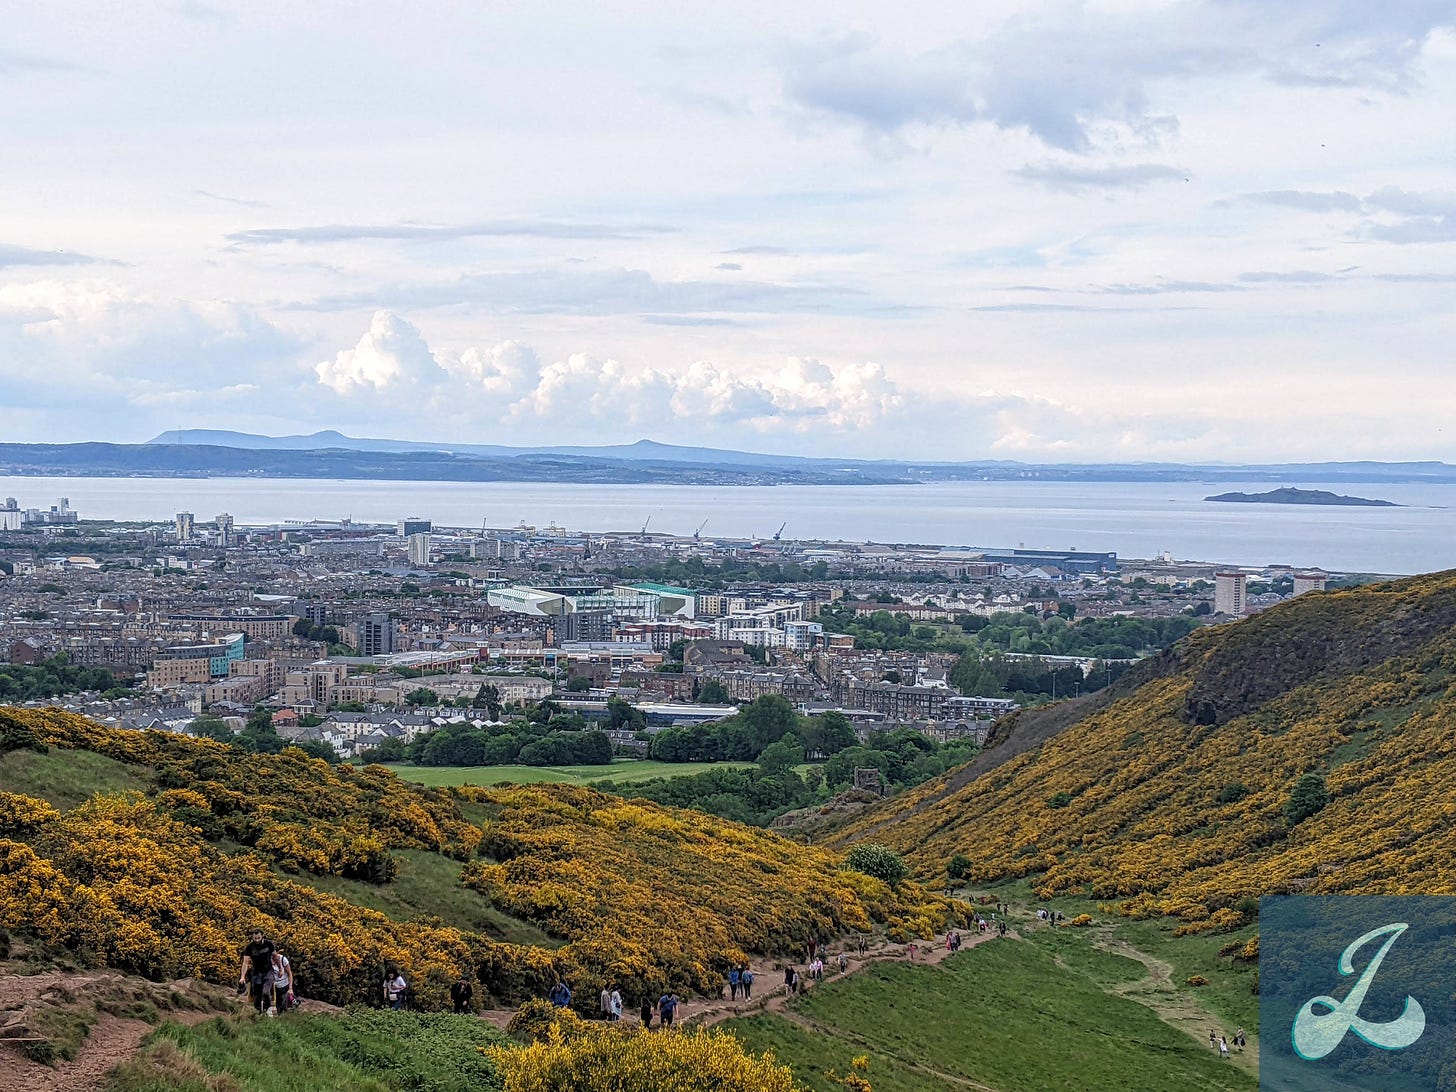 A landscape photo of Edinburgh. There is a moderately cloudy sky above the bay and cityscape of Old Town Edinburgh. In the foreground is a rocky dirt path leading to the city, surrounded by hills covered in thick patches of yellow, spiny flowers called gorse. Several people are walking up the path away from the city.